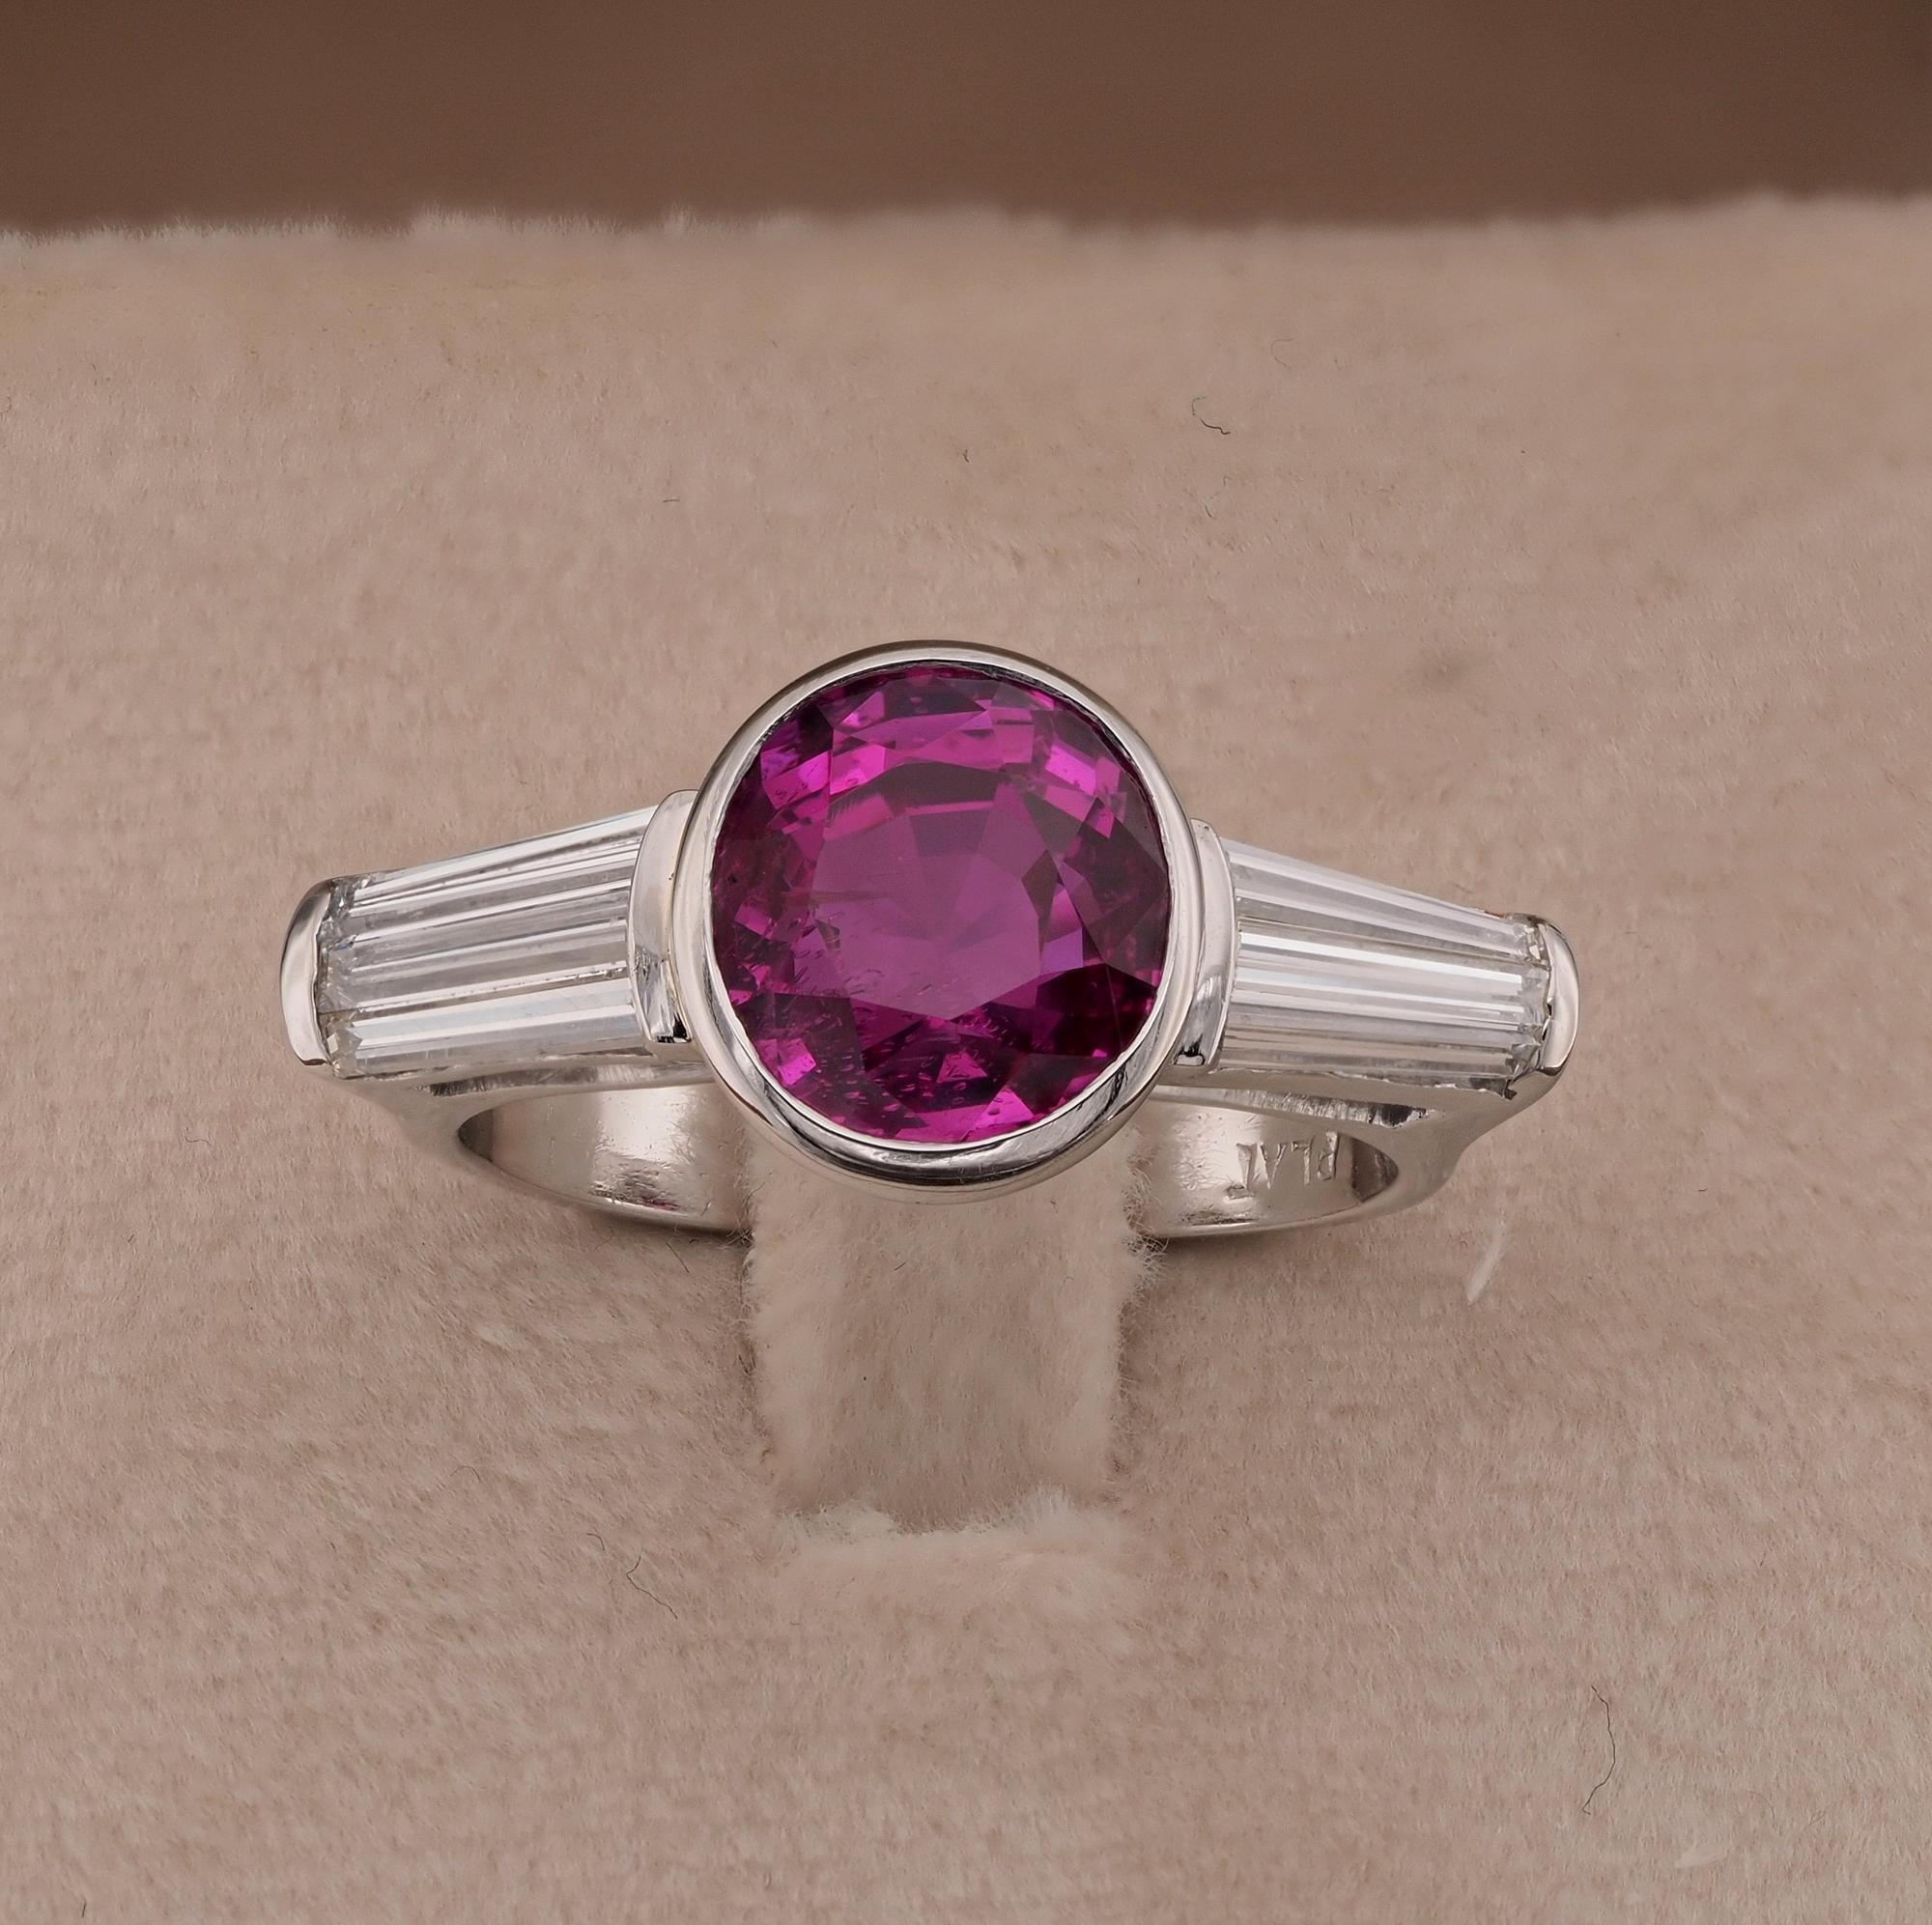 One of a Kind
A rare, quite unique Pink Sapphire Diamond engagement ring, estate, mid-century. Exquisitely hand crafted of solid Platinum, marked
Marvellous design for the mounting platinum hand fabricated to exalt at maximum the rarest Pink